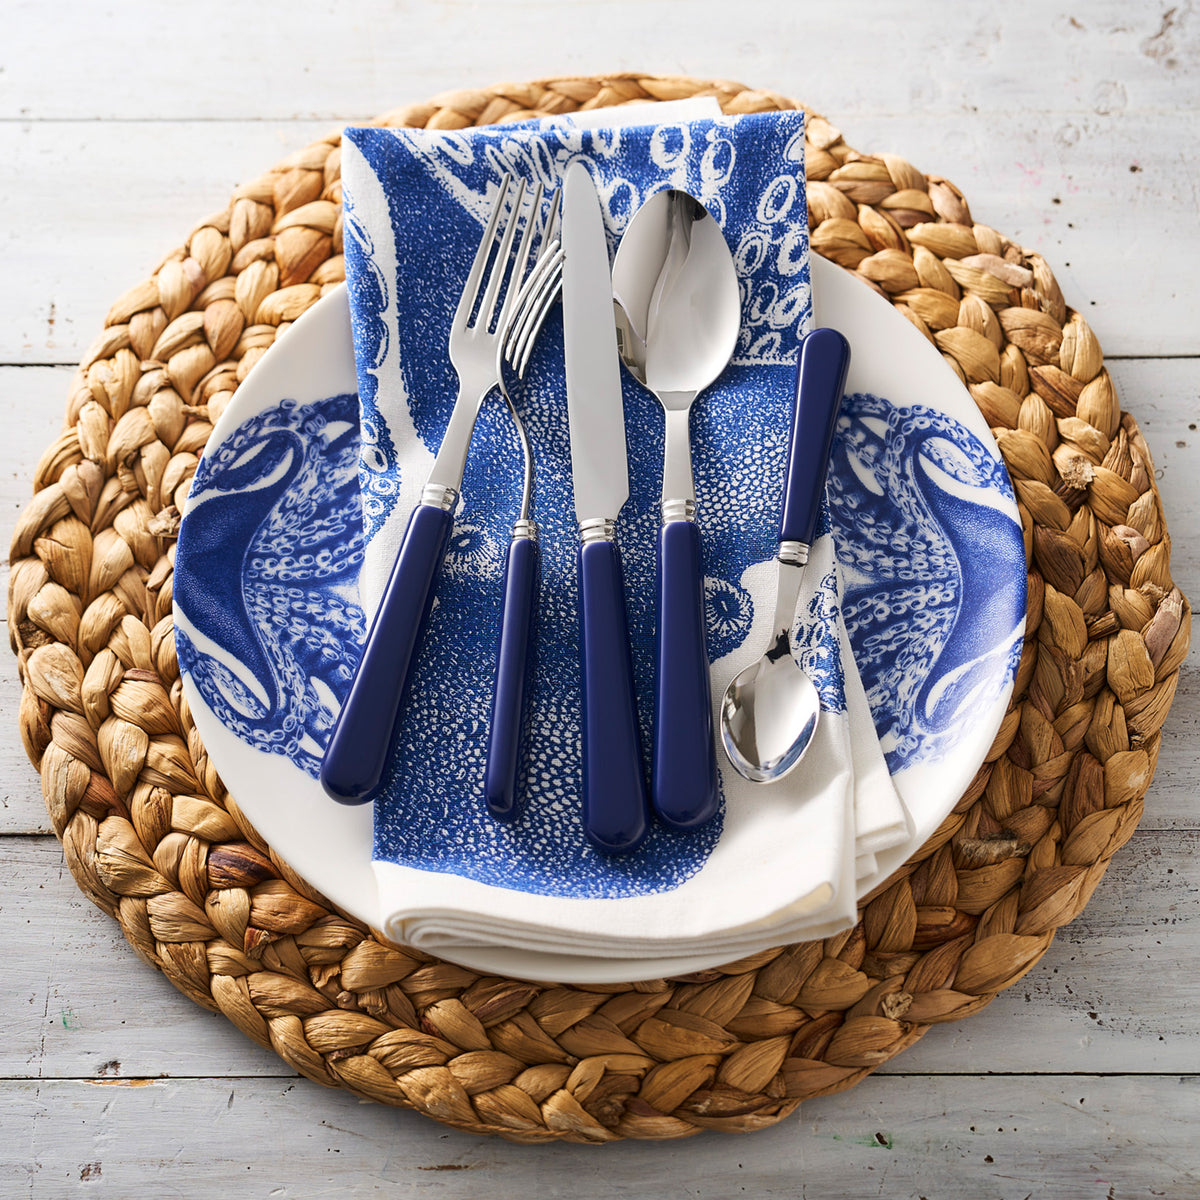 A place setting with a creamy white Lucy Coupe Dinner Plate from Caskata Artisanal Home, blue-handled cutlery, a blue-patterned napkin, and a braided placemat on a white wooden table.